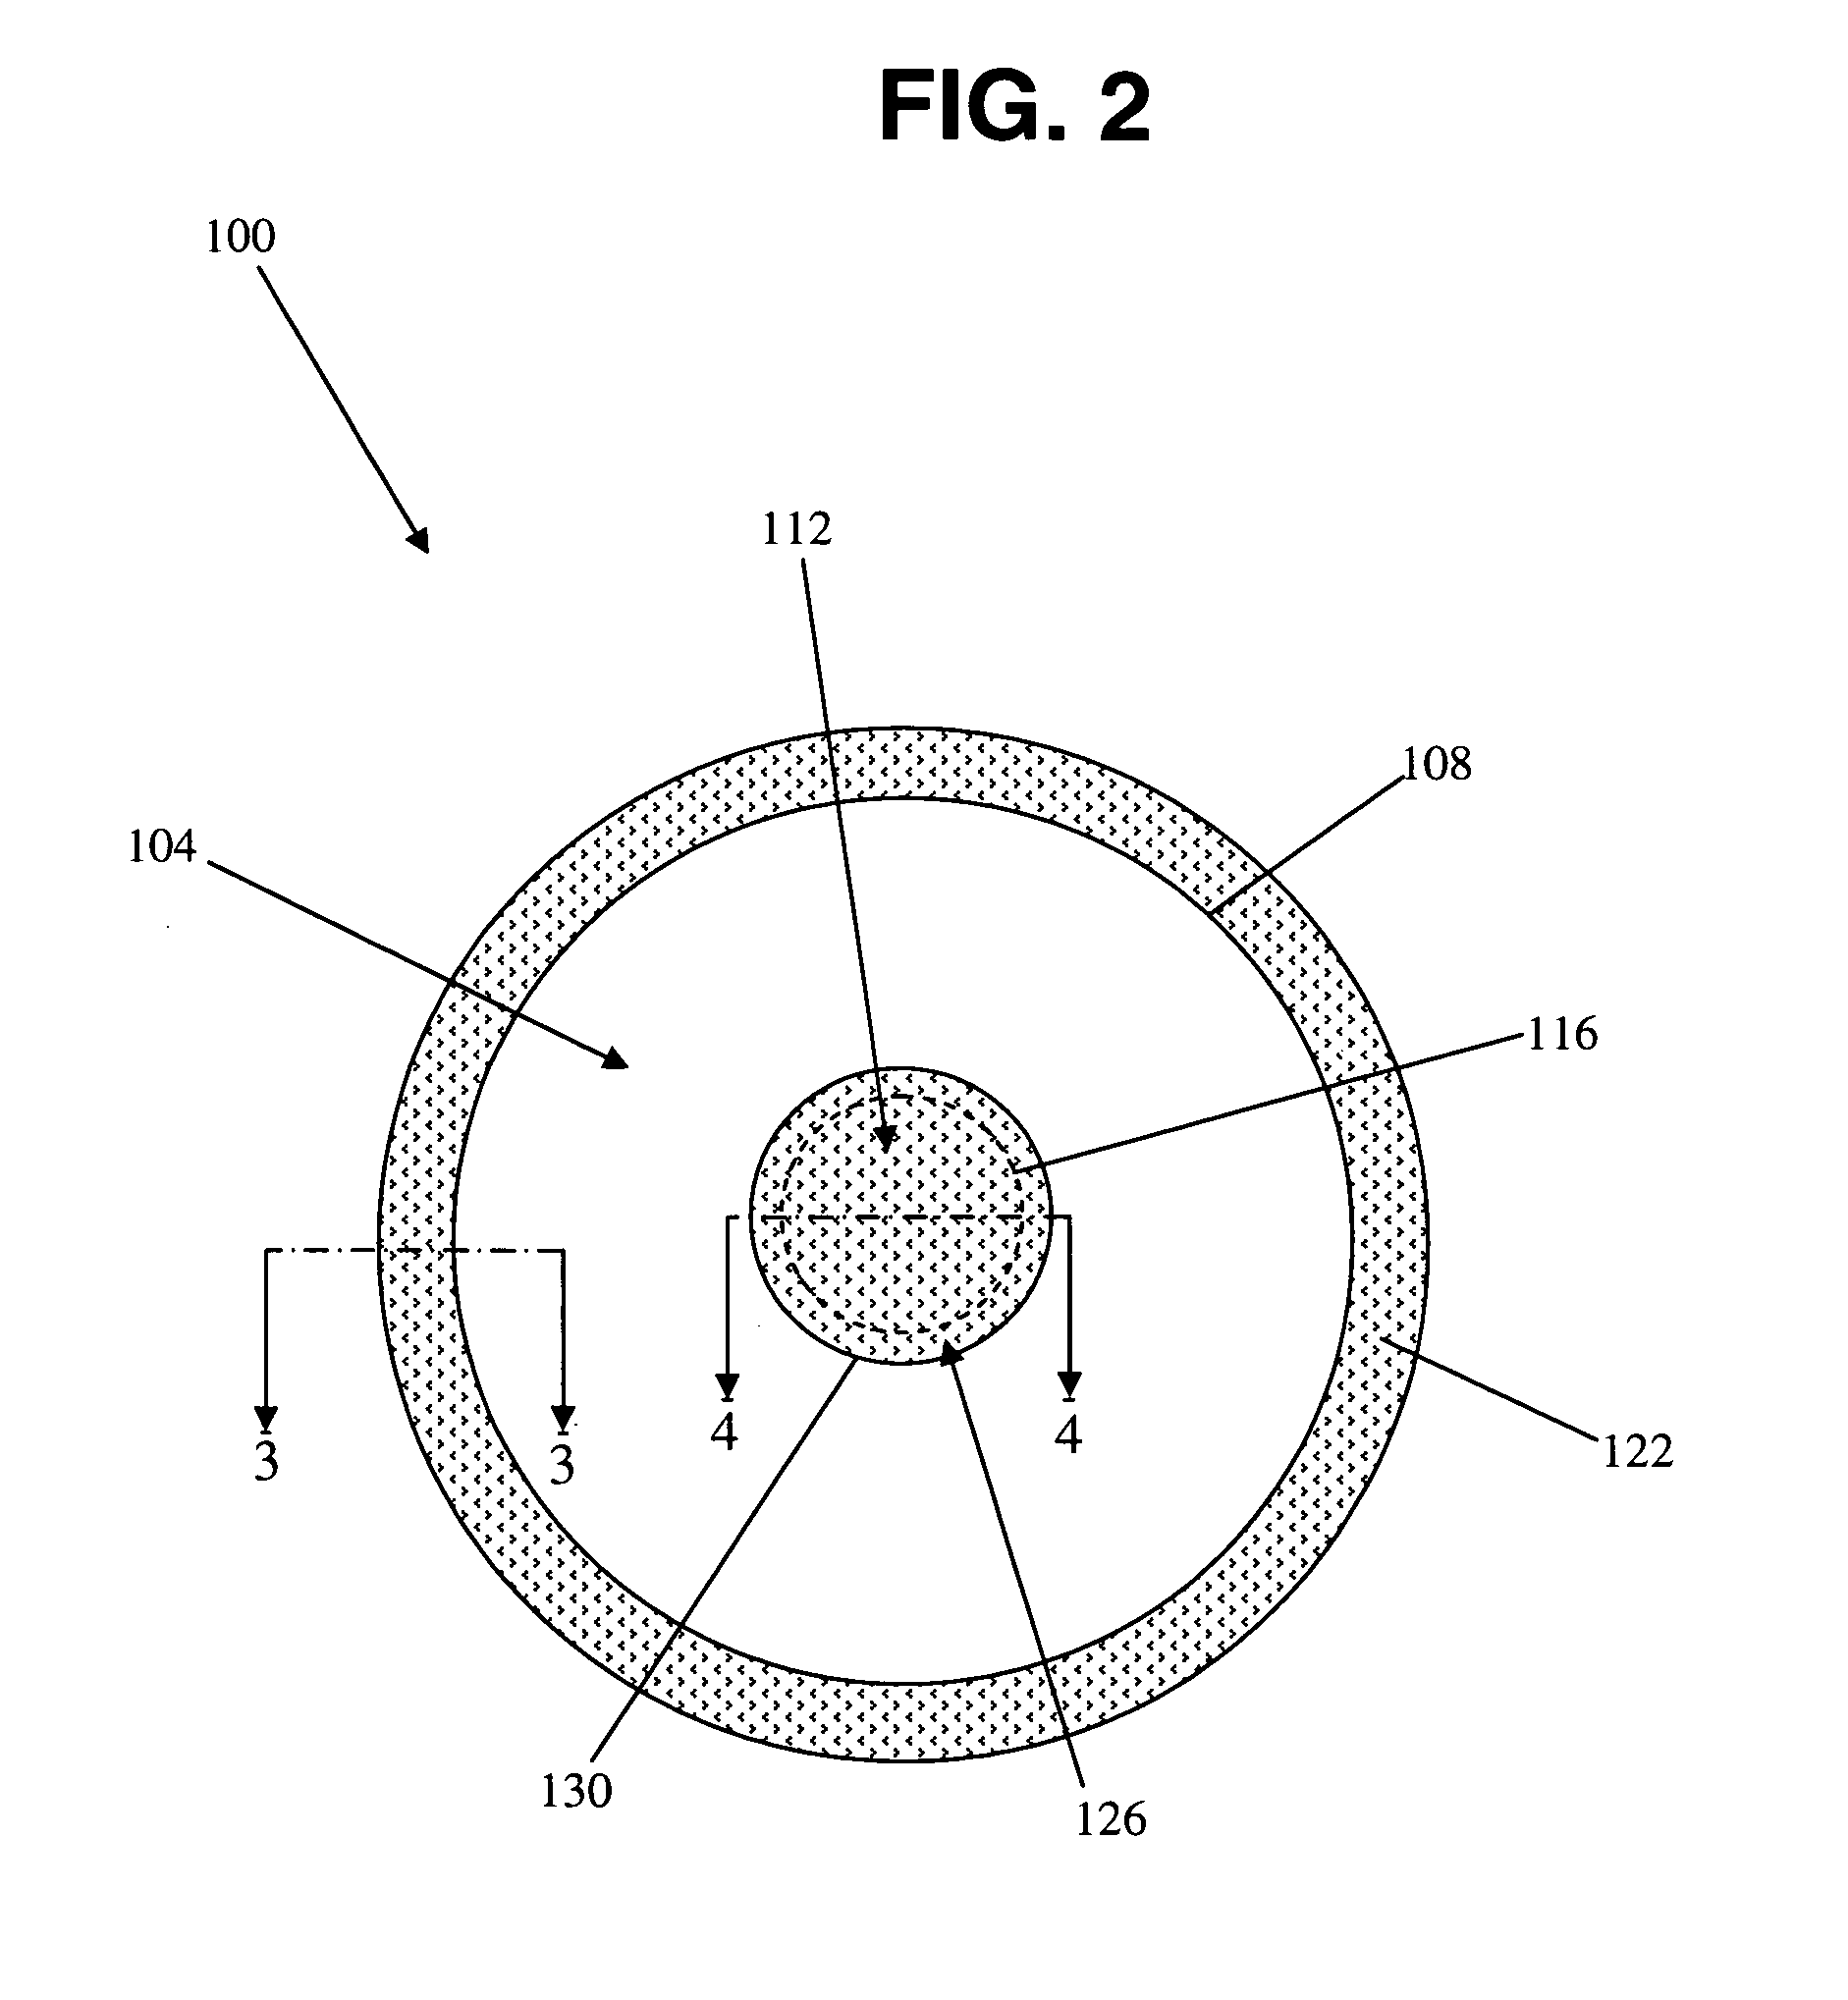 Article comprising holographic medium between substrates having environmental barrier seal and process for preparing same